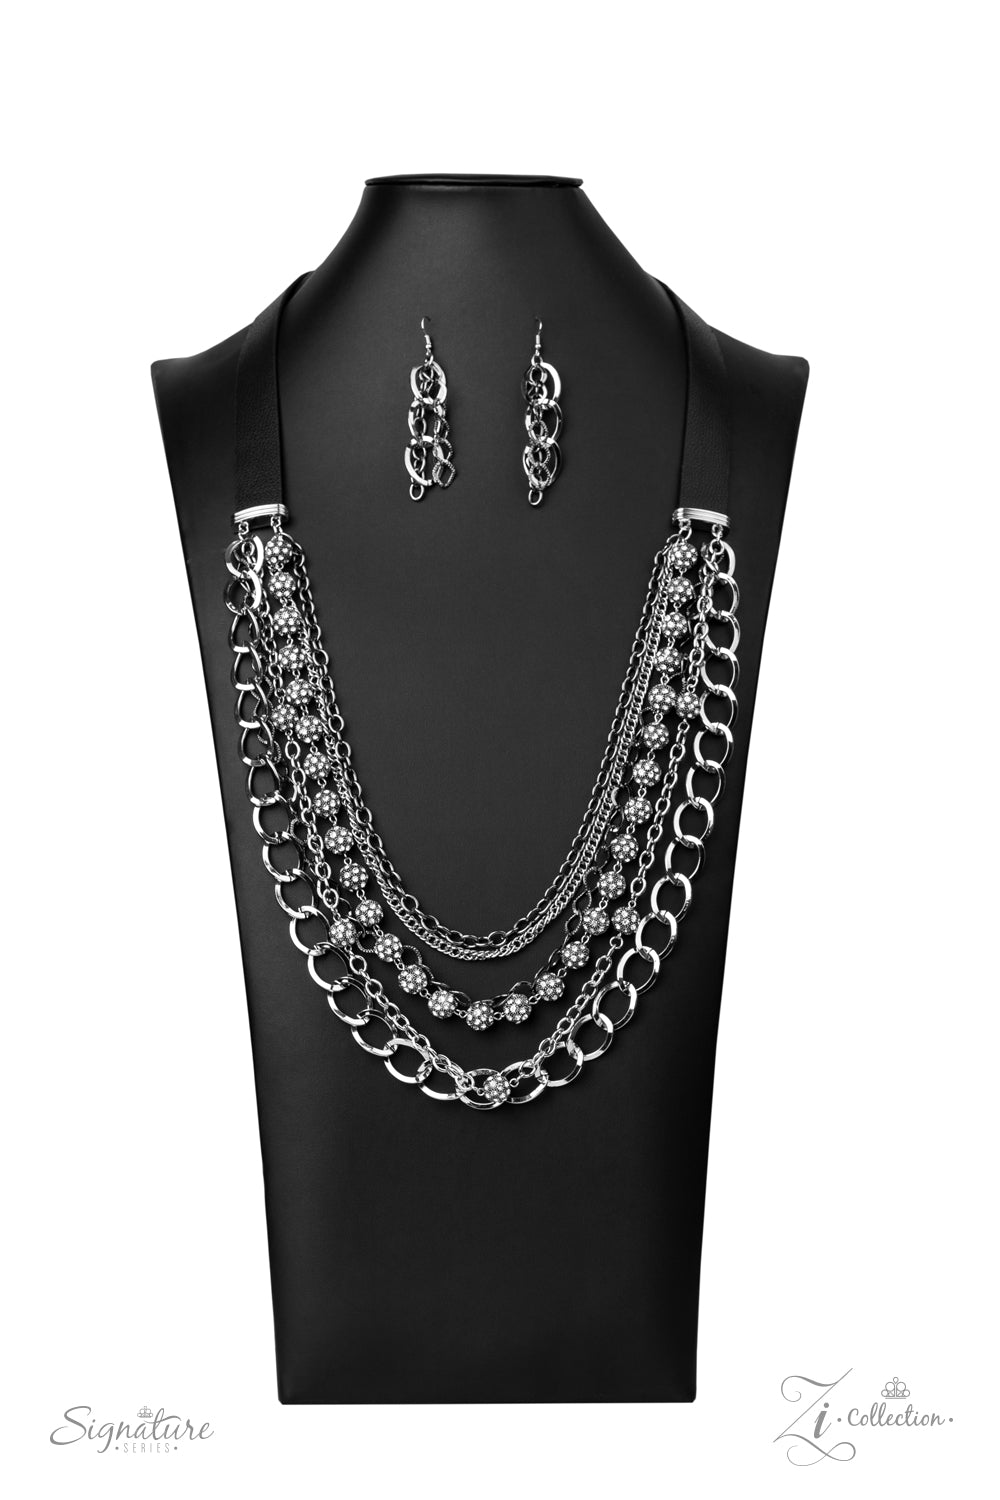 THE ARLINGTO - BLACK LEATHER SILVER CHAINS RHINESTONE BEADS 2020 ZI NECKLACE